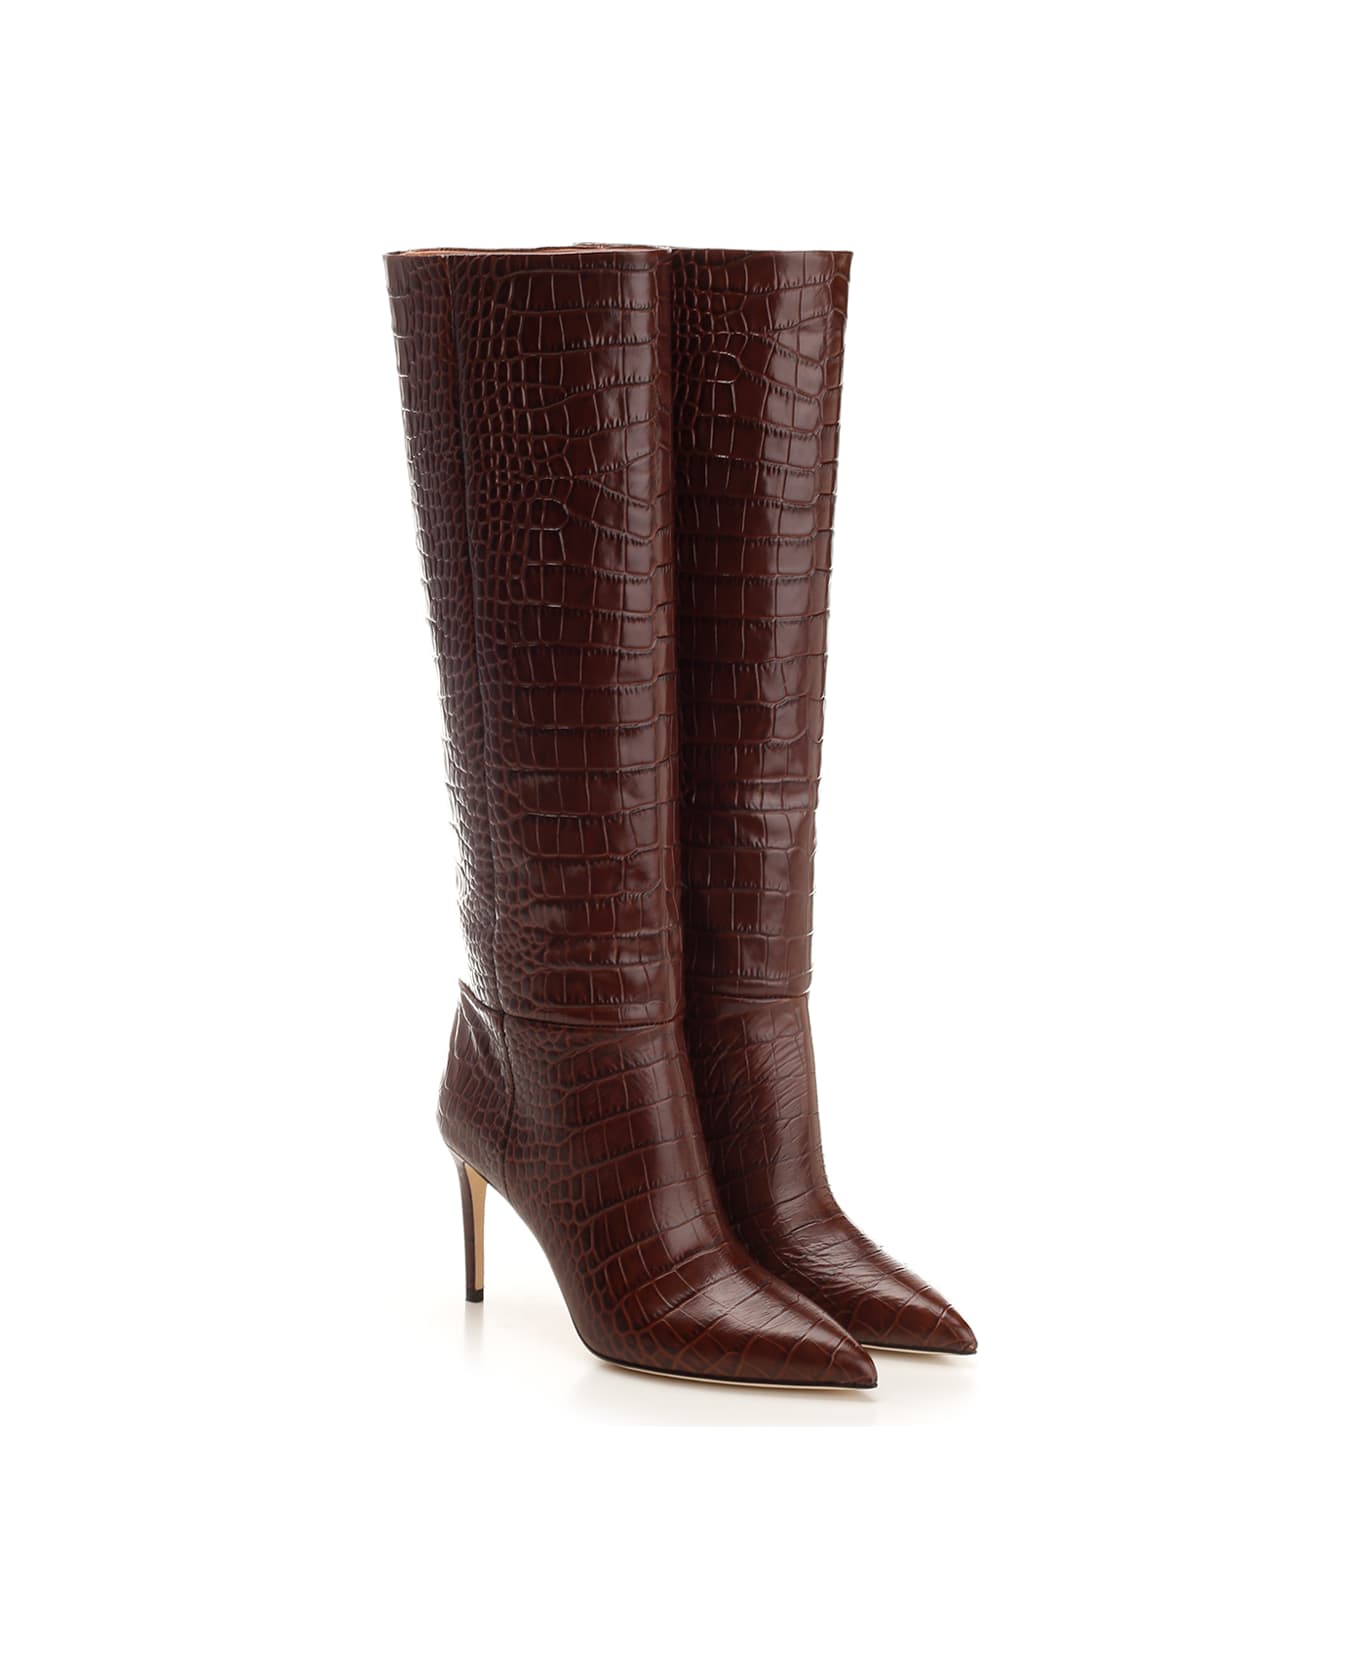 Paris Texas Embossed Leather Boots - BROWN